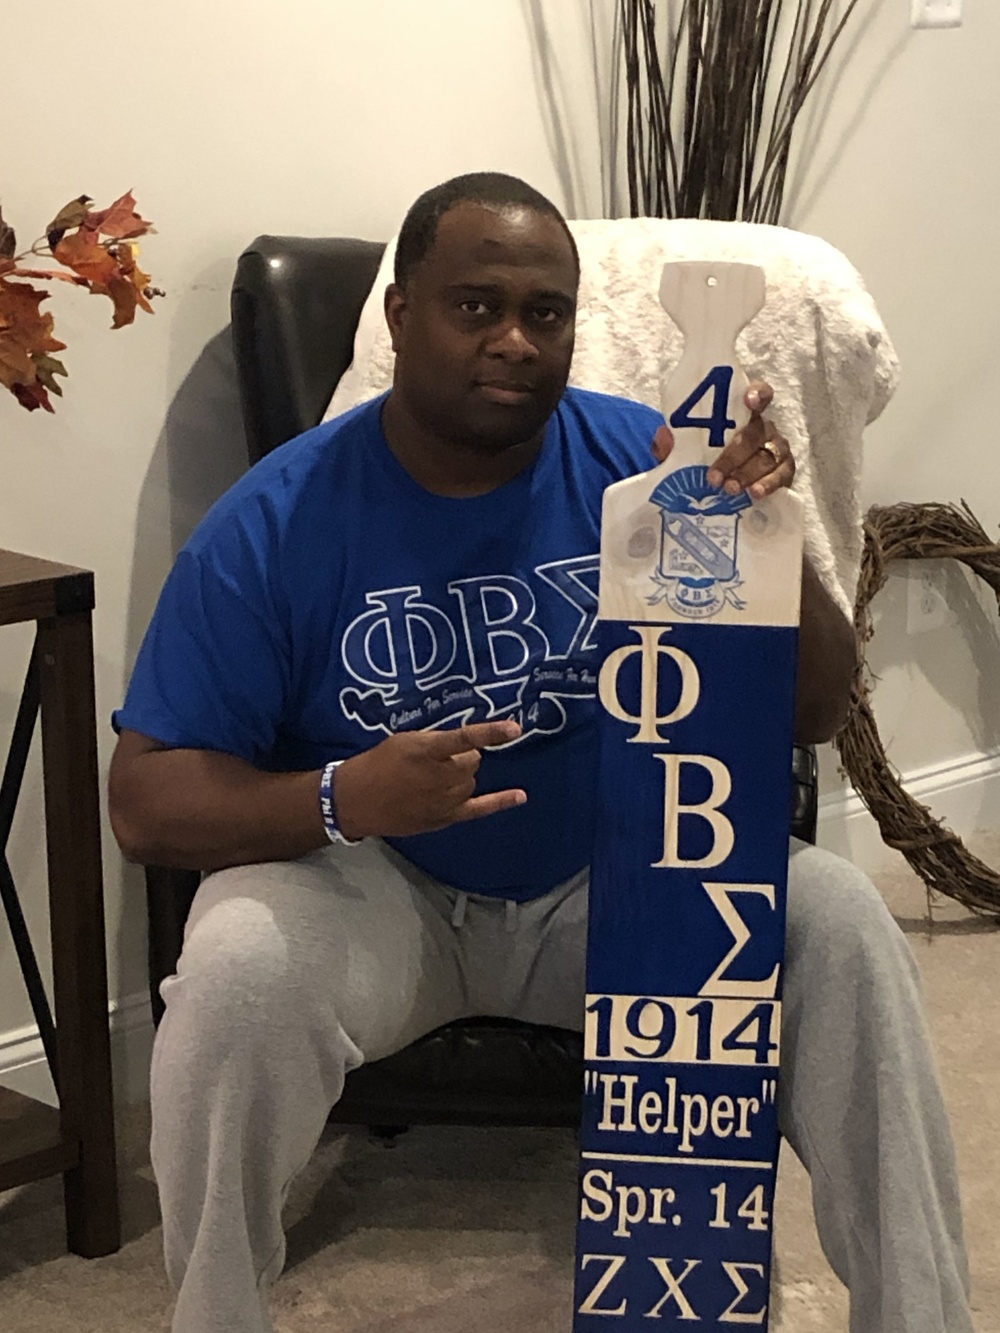 U.S. Air Force Lt. Col. Corwin Smith, a chaplain with the 113th Wing, District of Columbia Air National Guard, and a member of Phi Beta Sigma Fraternity, Inc., poses for a photo in his fraternity attire in 2014